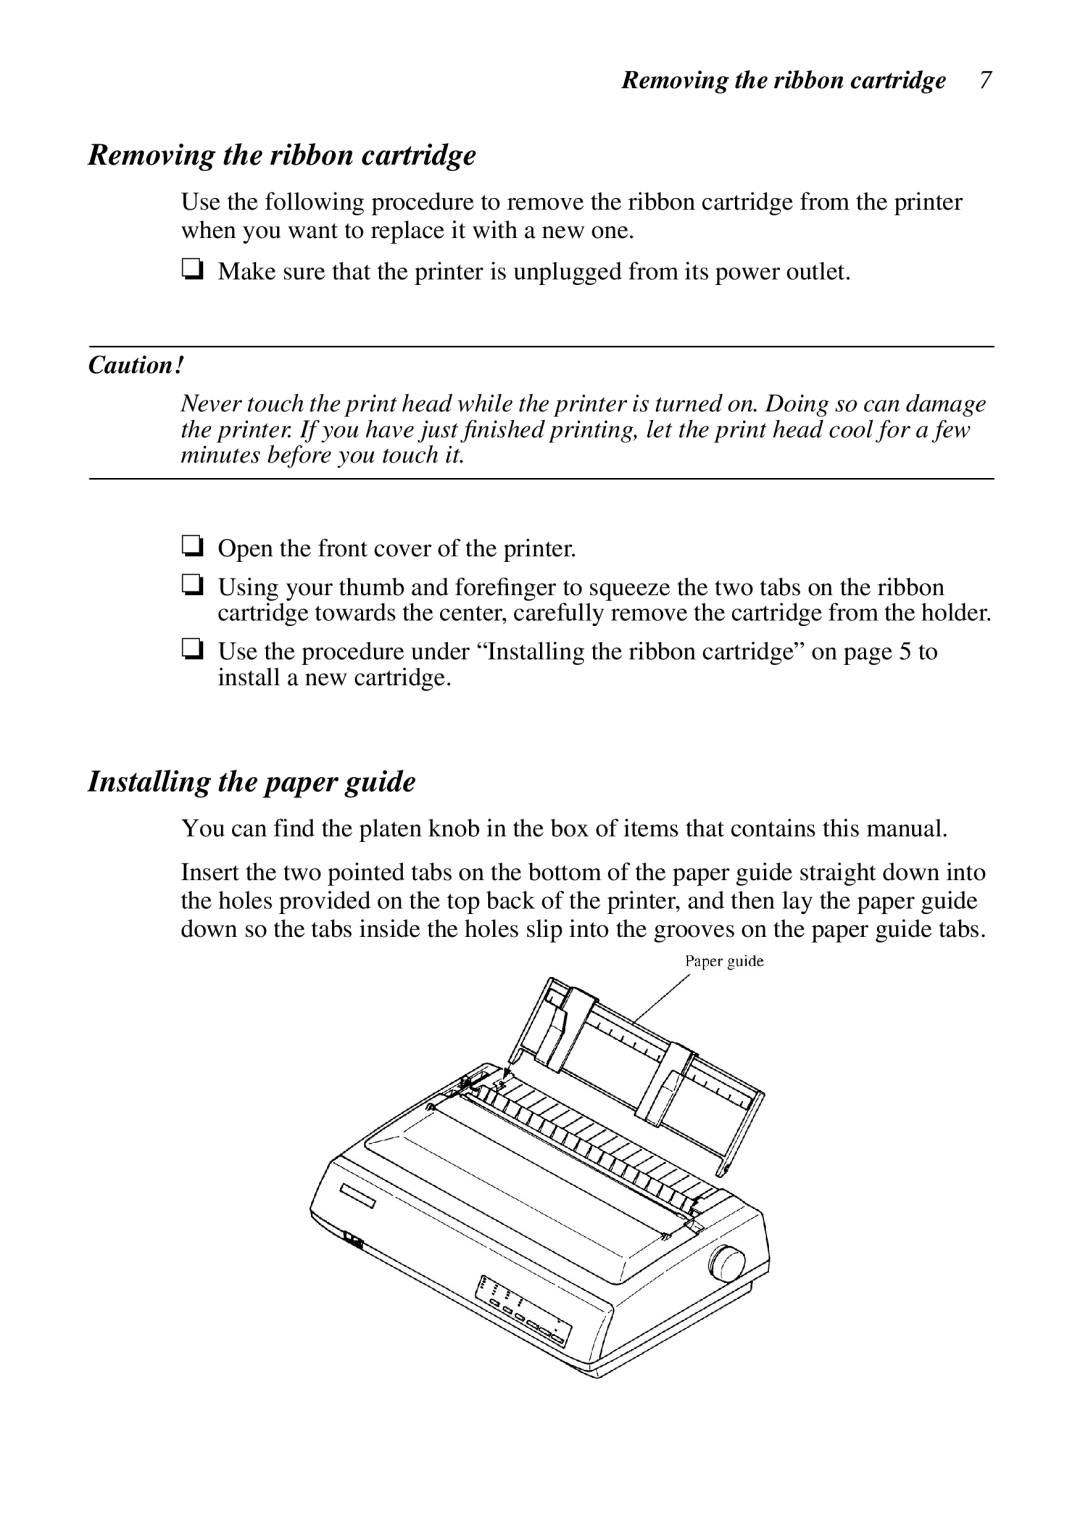 Star Micronics XB24-250 II user manual Removing the ribbon cartridge, Installing the paper guide 